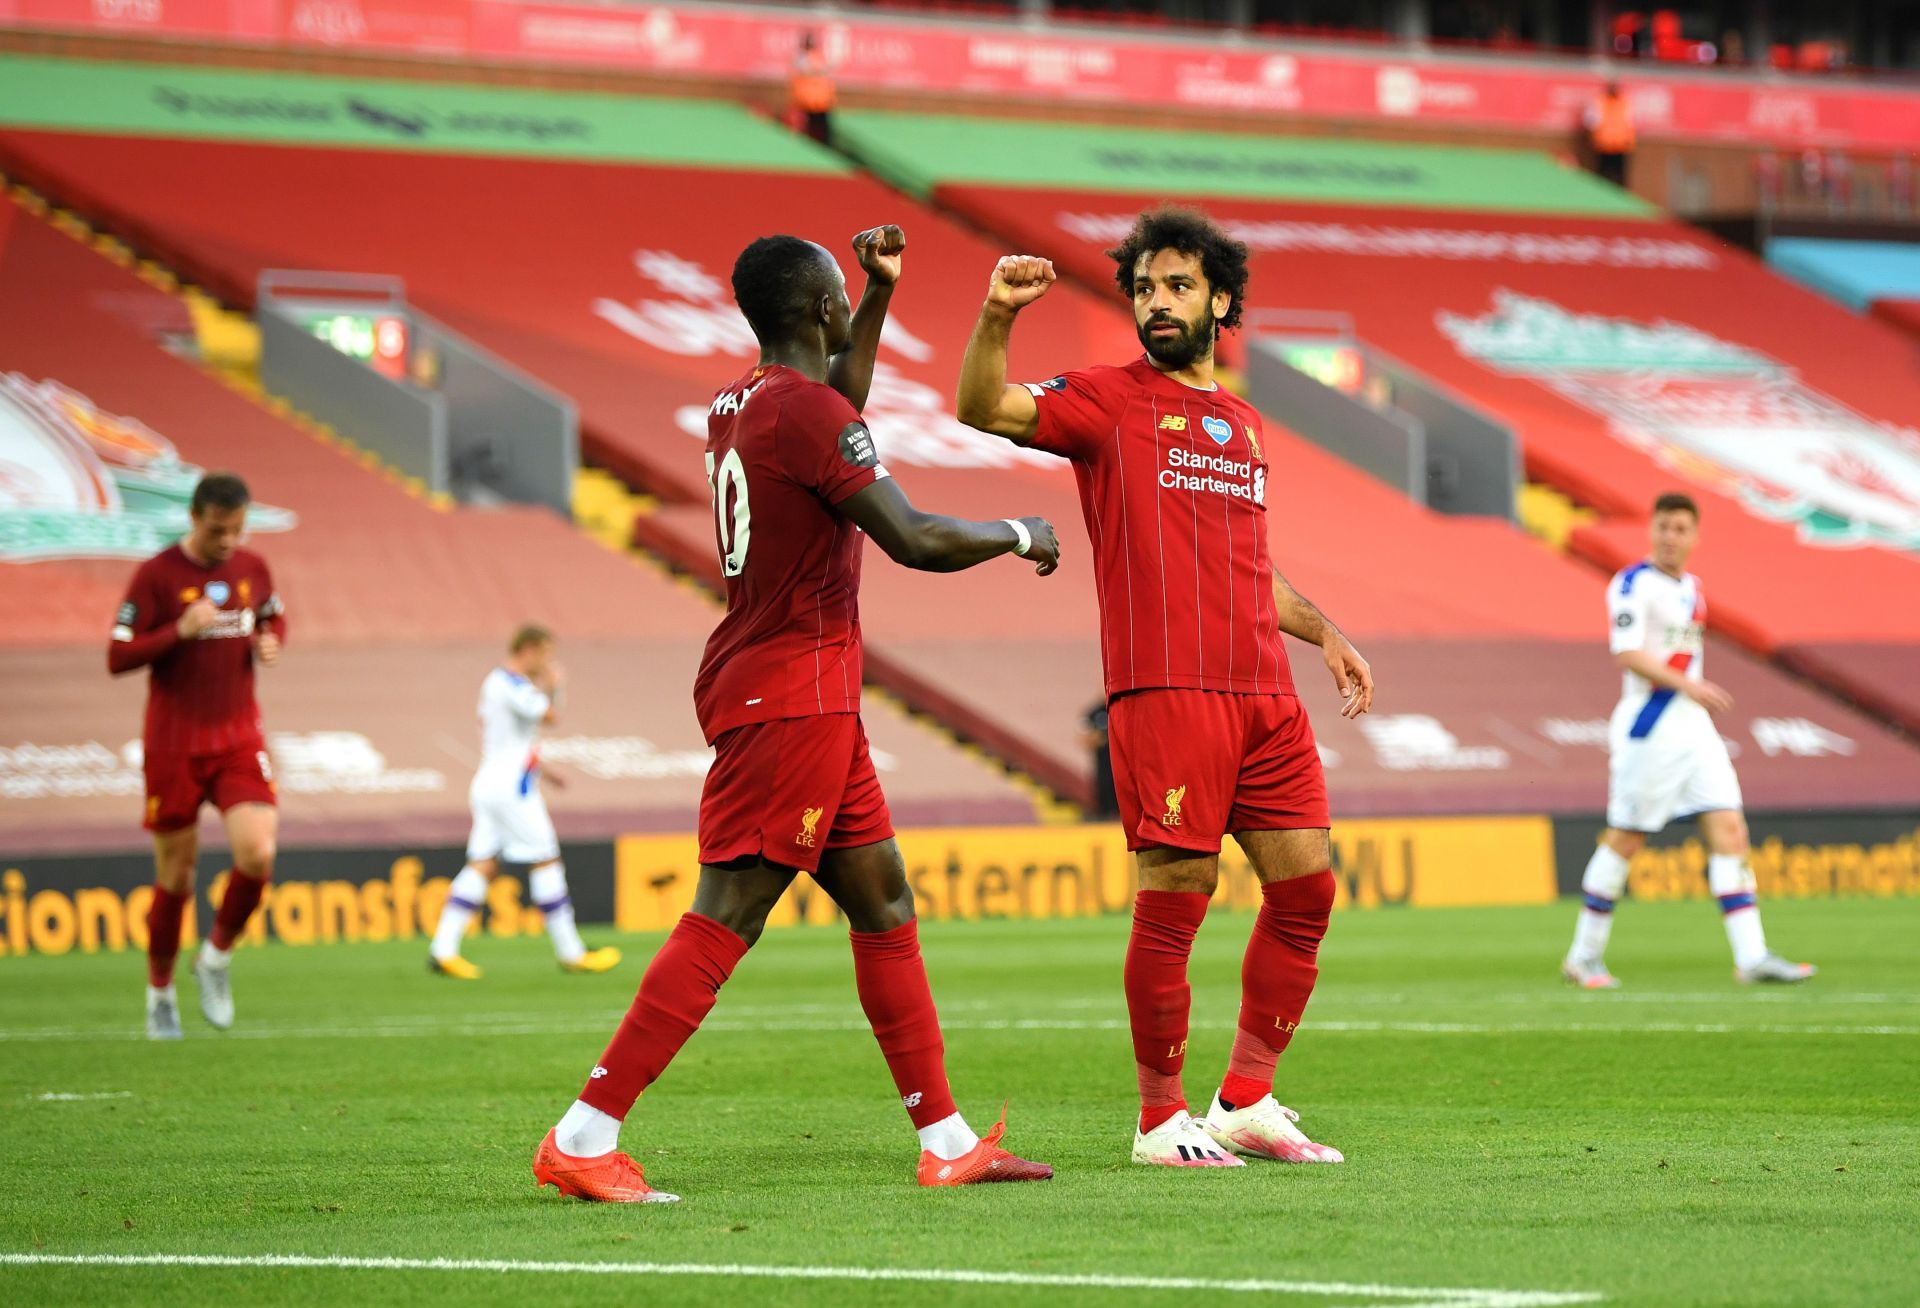 The two attackers continue firing on all cylinders for the Reds